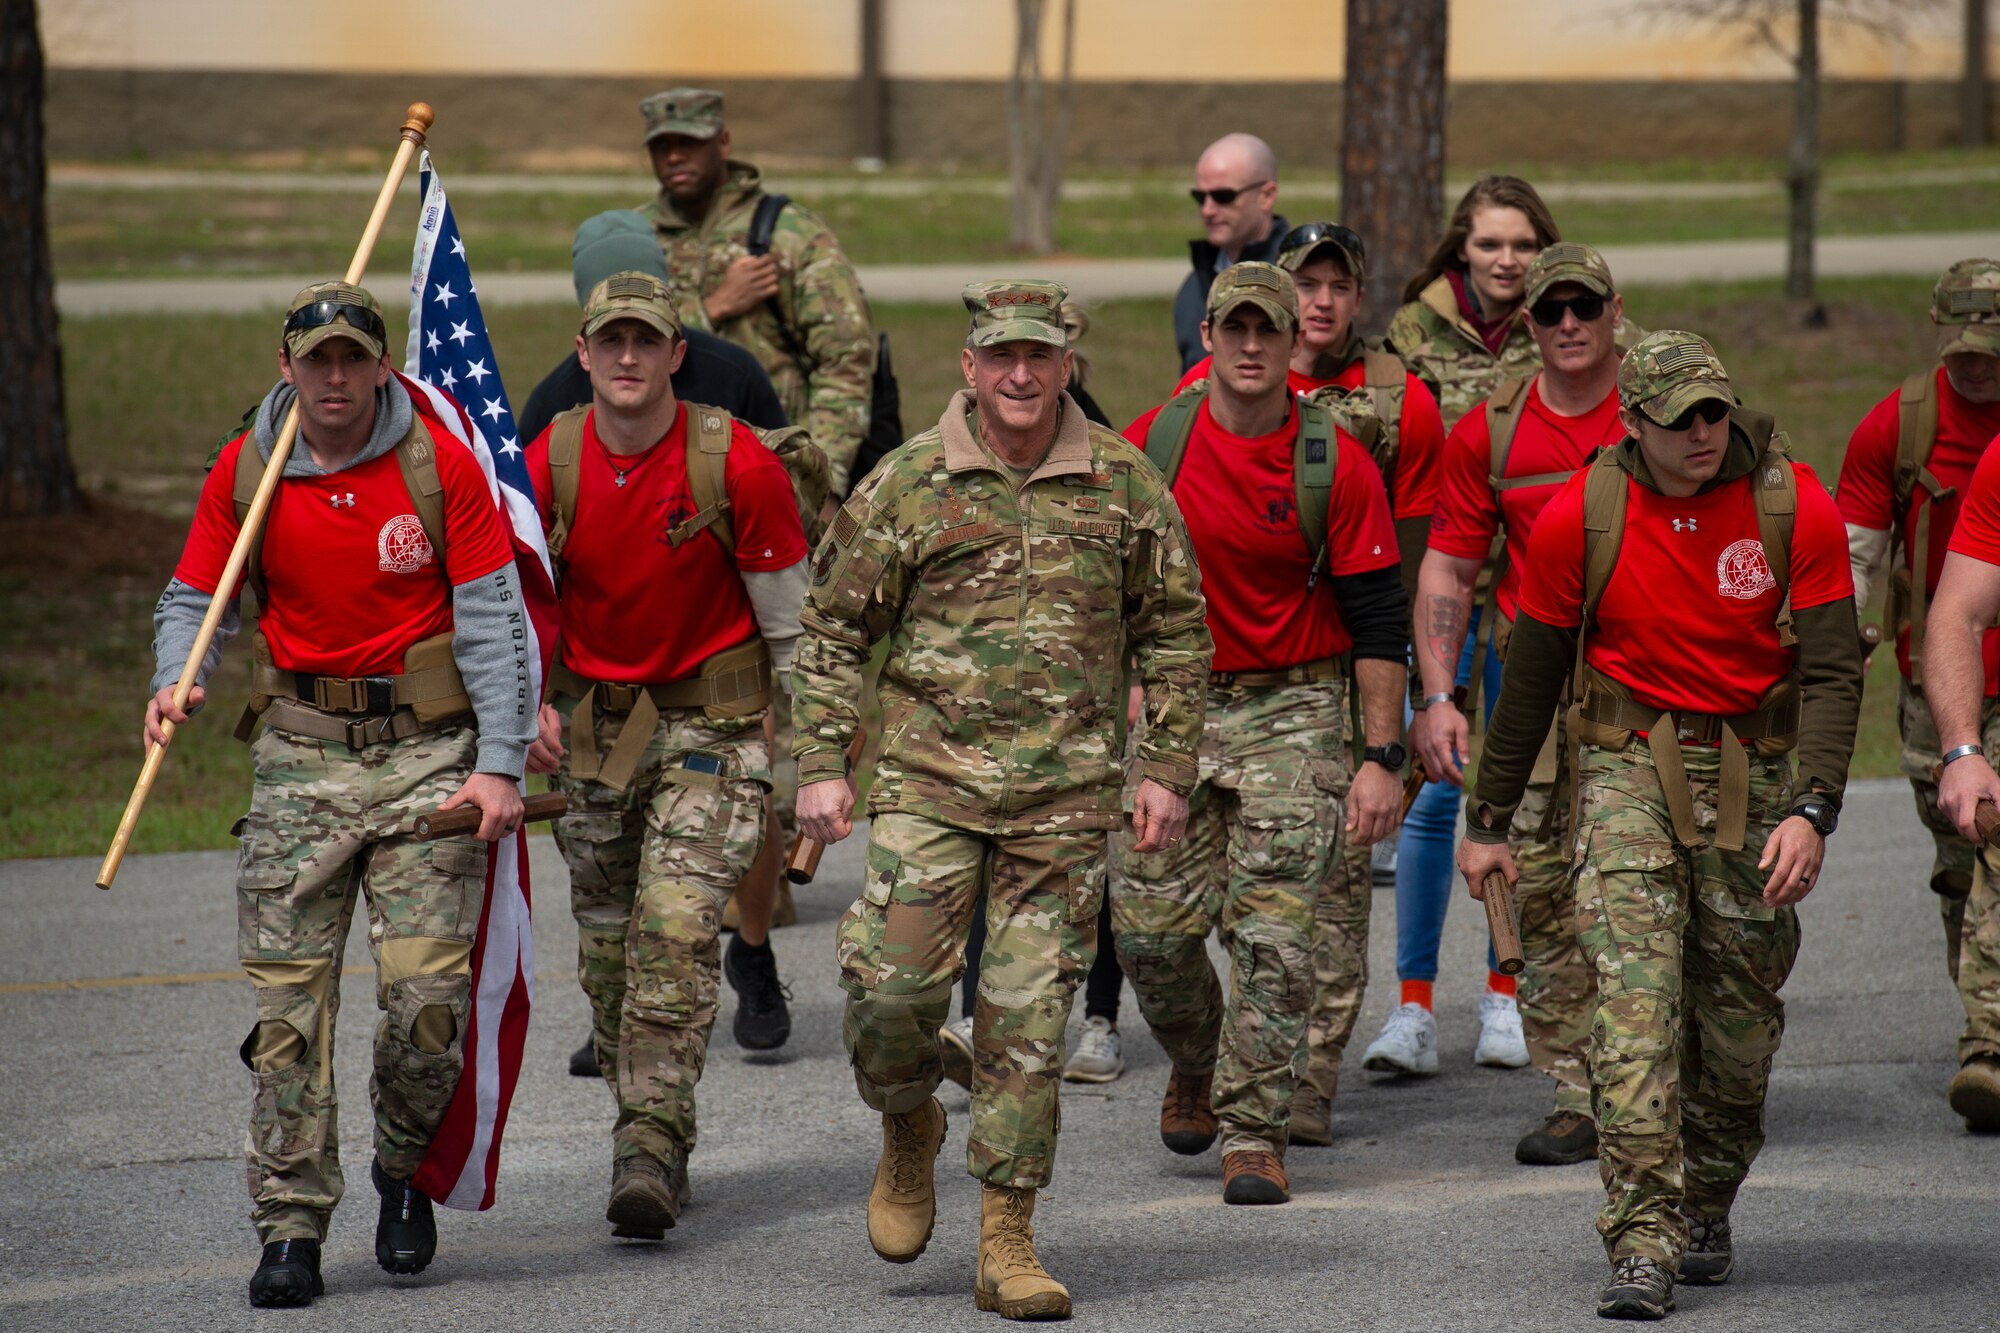 Air Force Chief of Staff Gen. David L. Goldfein marches alongside Special Tactics Airmen with the 24th Special Operations Wing during the Special Tactics Memorial March at Hurlburt Field, Florida, March 4, 2018.